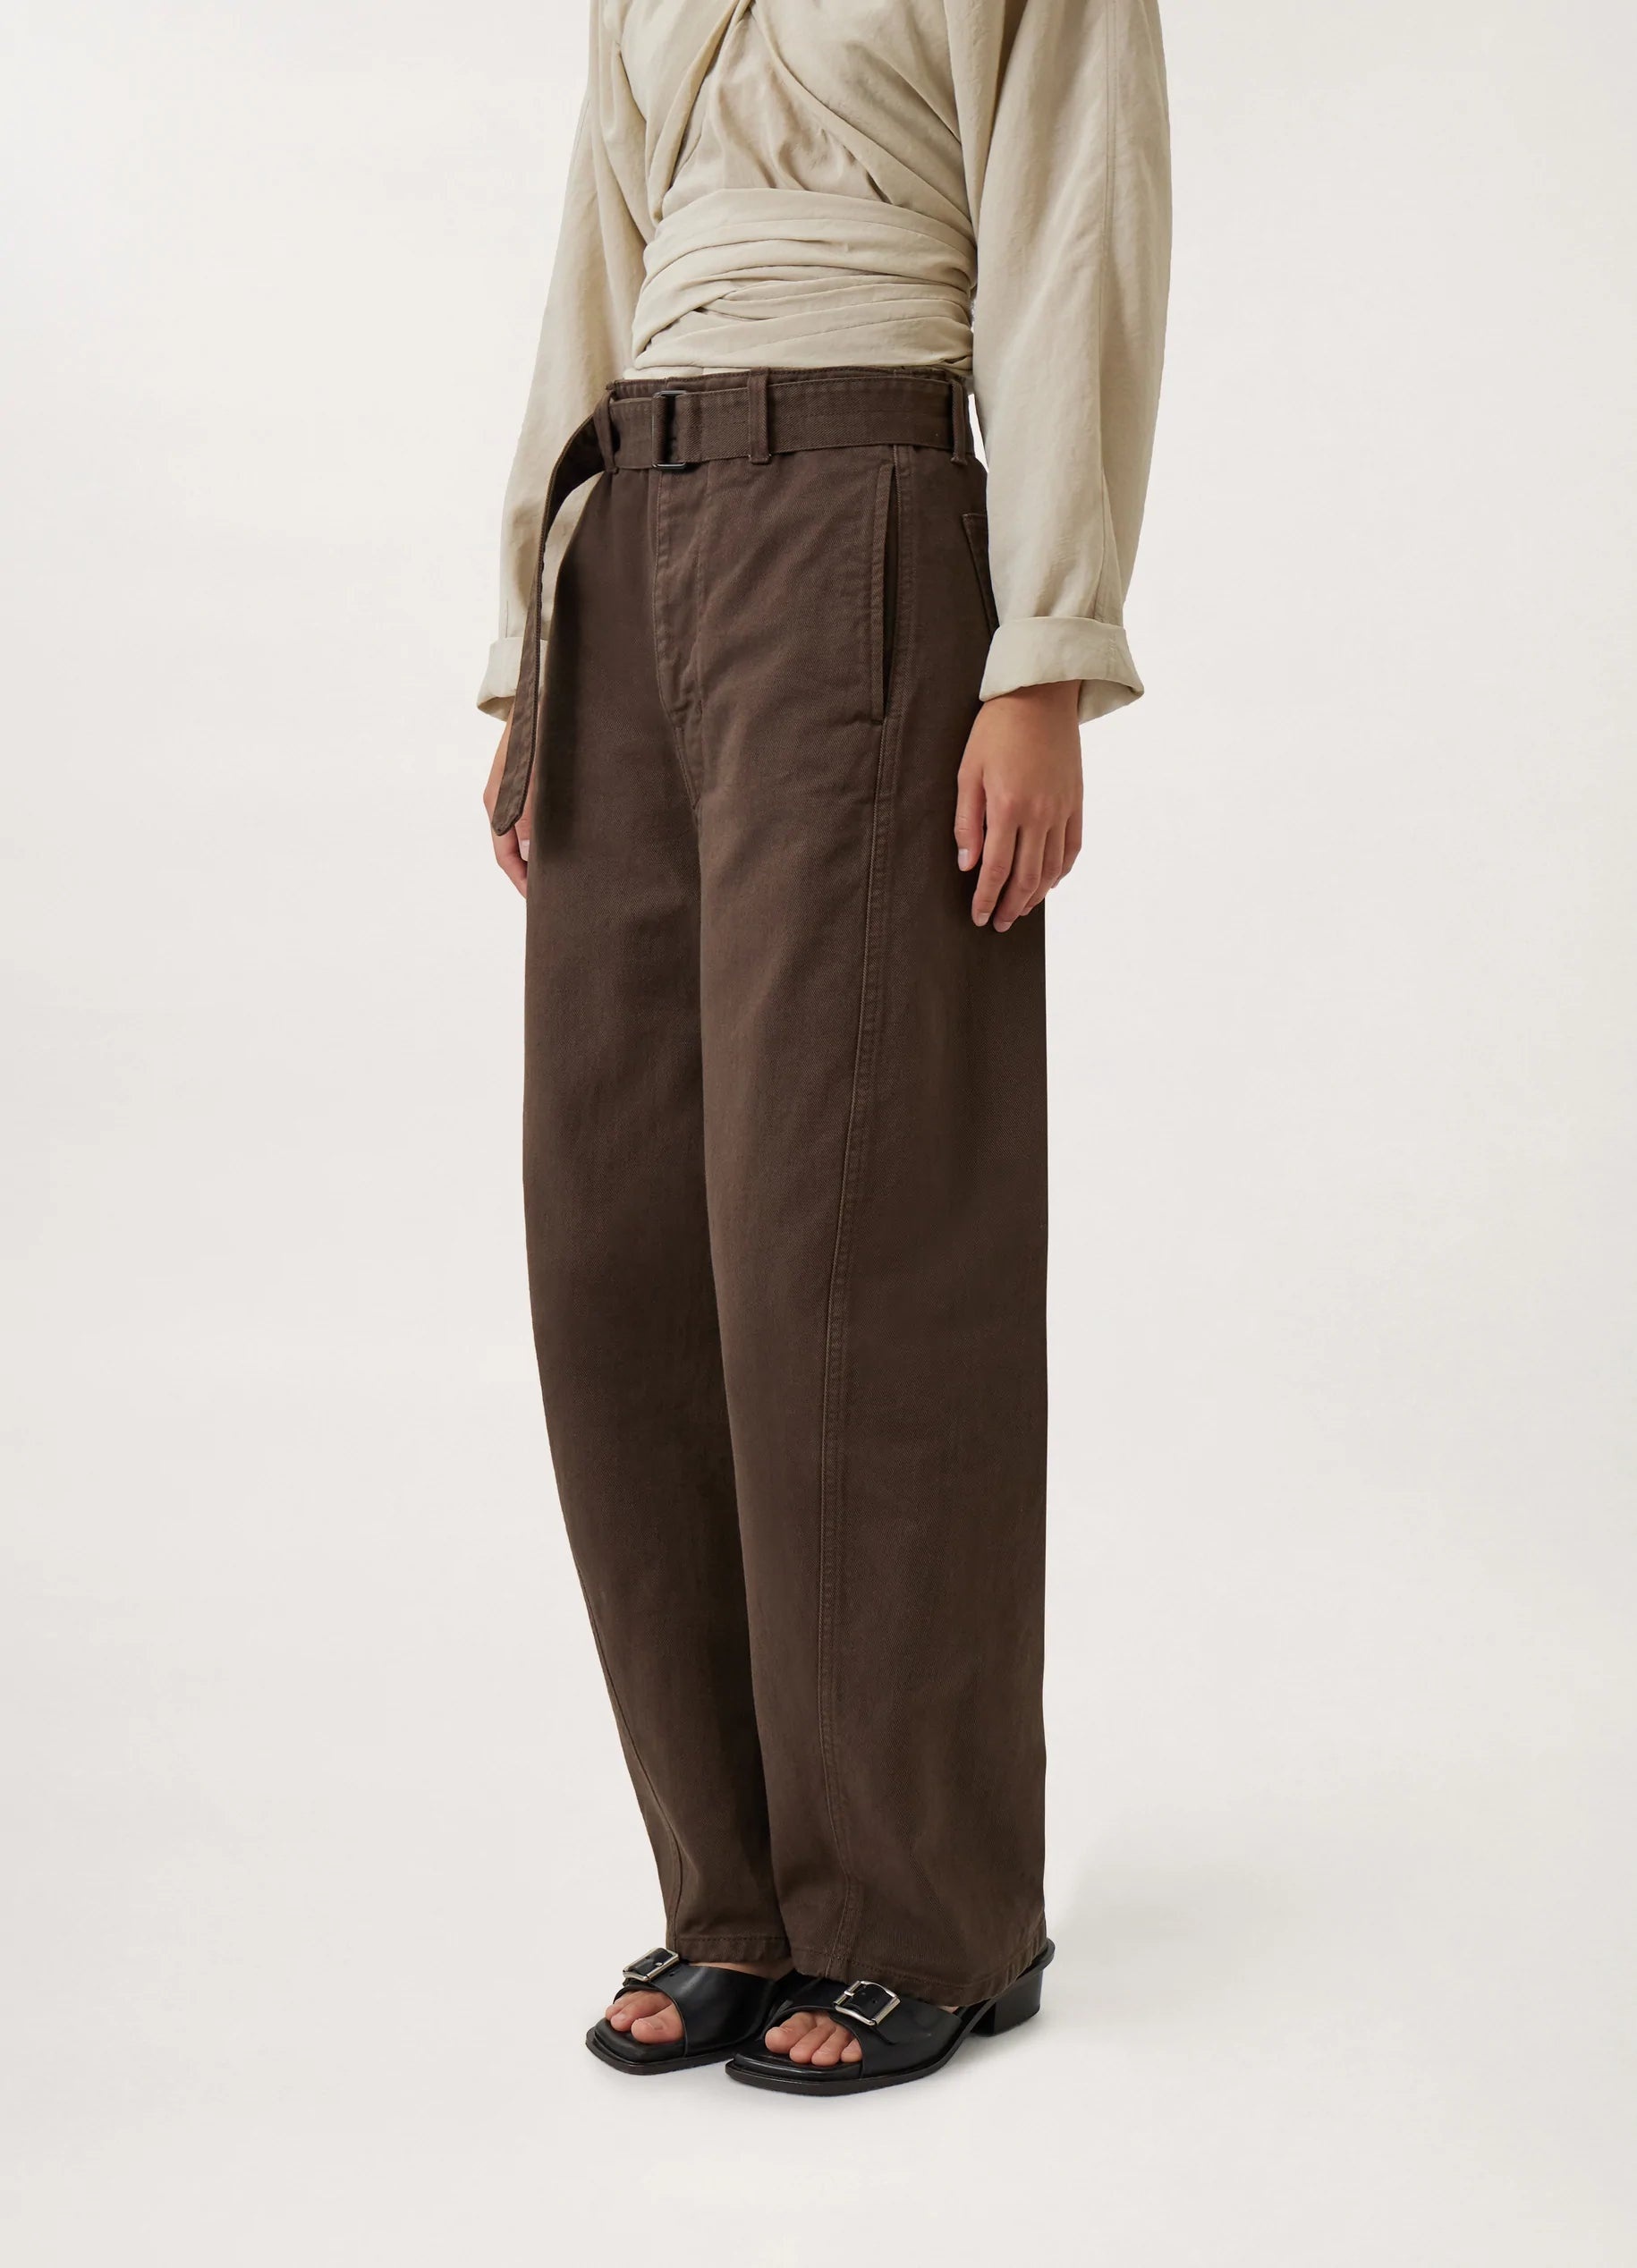 Lemaire TWISTED BELTED PANTS GARMENT DYED DENIM | REVERSIBLE